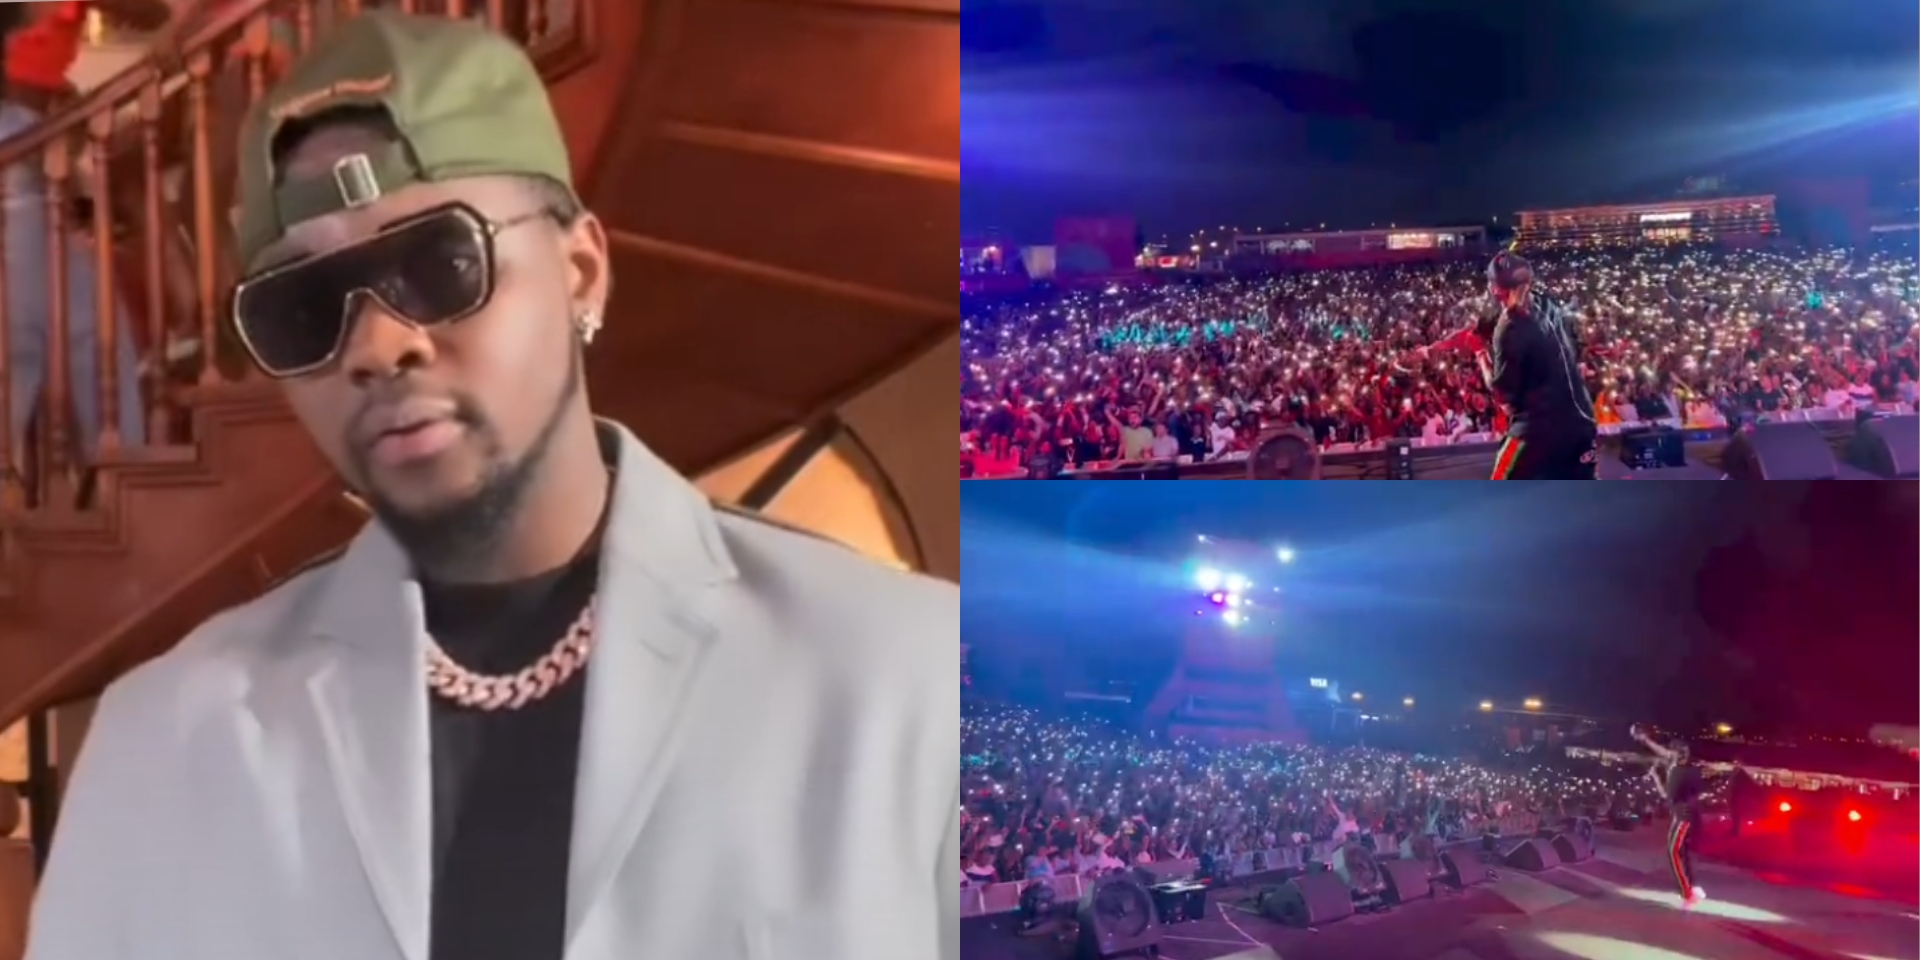 World Cup: “As a Naija boy” – Kizz Daniel writes, shares video of himself commanding crowd during performance